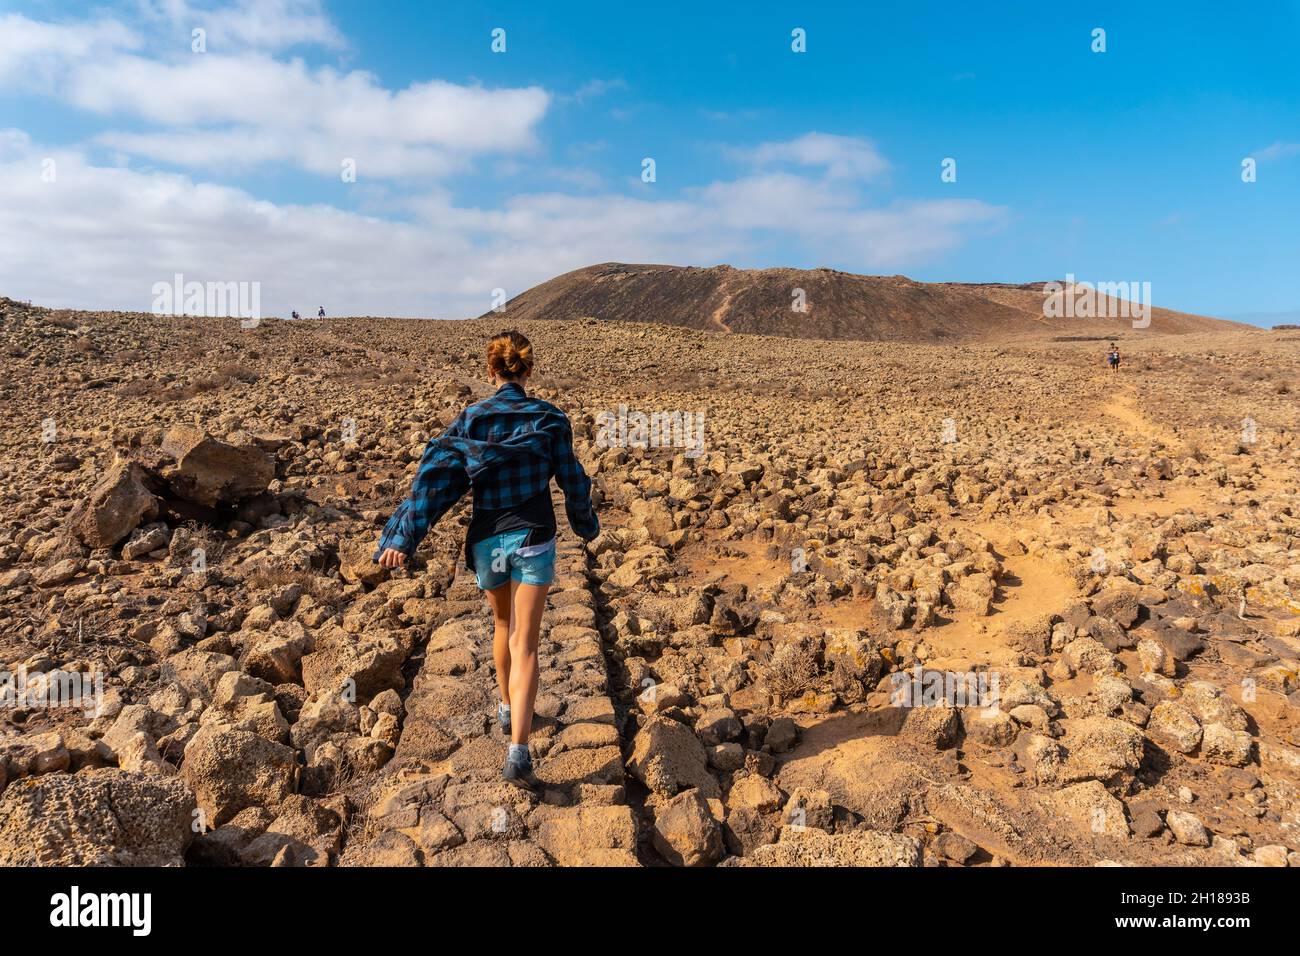 A young woman on the trail to the Crater of the Calderon Hondo volcano near  Corralejo, the island of Fuerteventura, Canary Islands, Spain Stock Photo -  Alamy